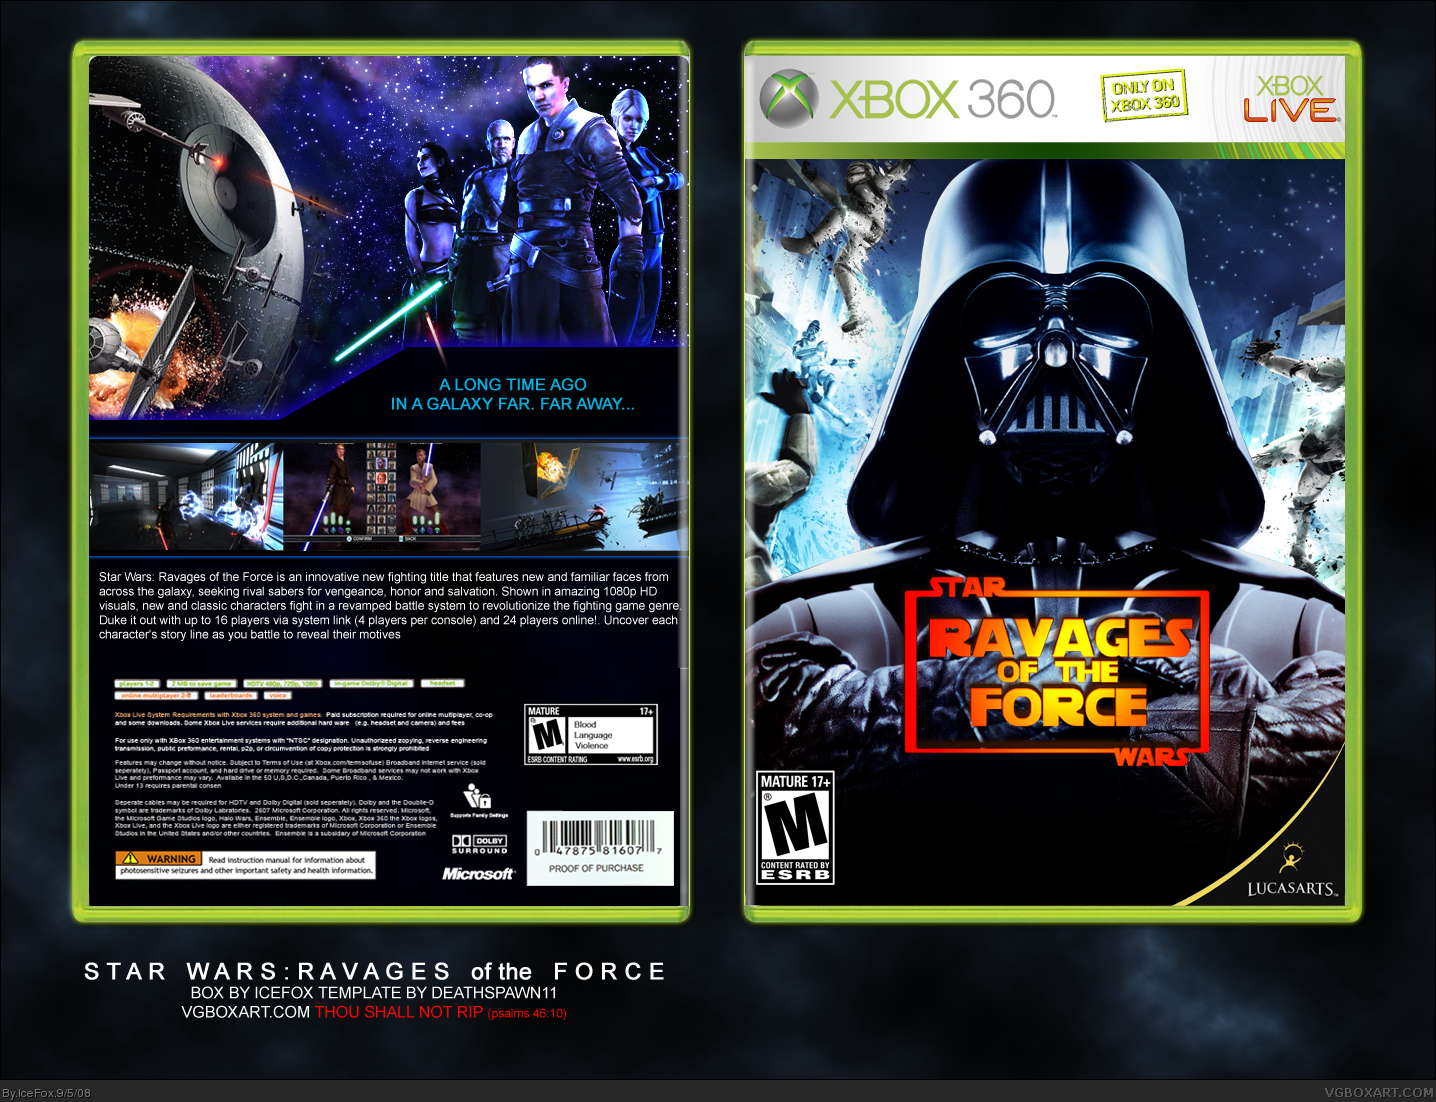 Star Wars: Ravages of the Force box cover